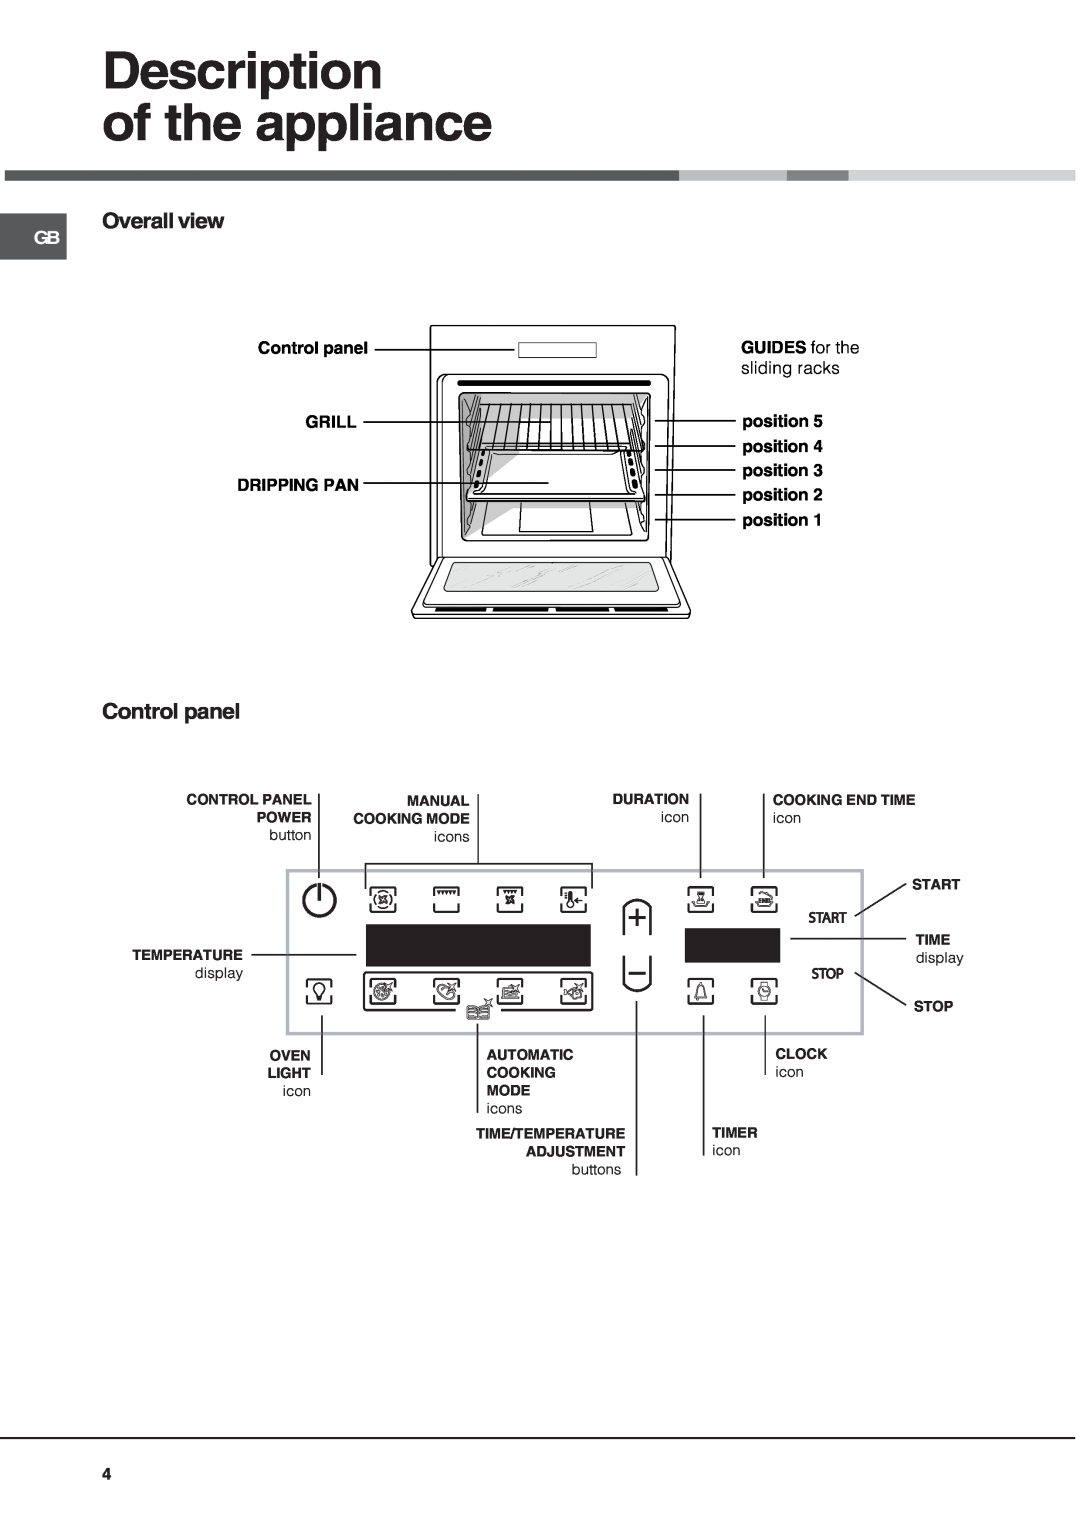 Hotpoint SE1032X Description of the appliance, Control panel GRILL DRIPPING PAN, GUIDES for the sliding racks, icons 